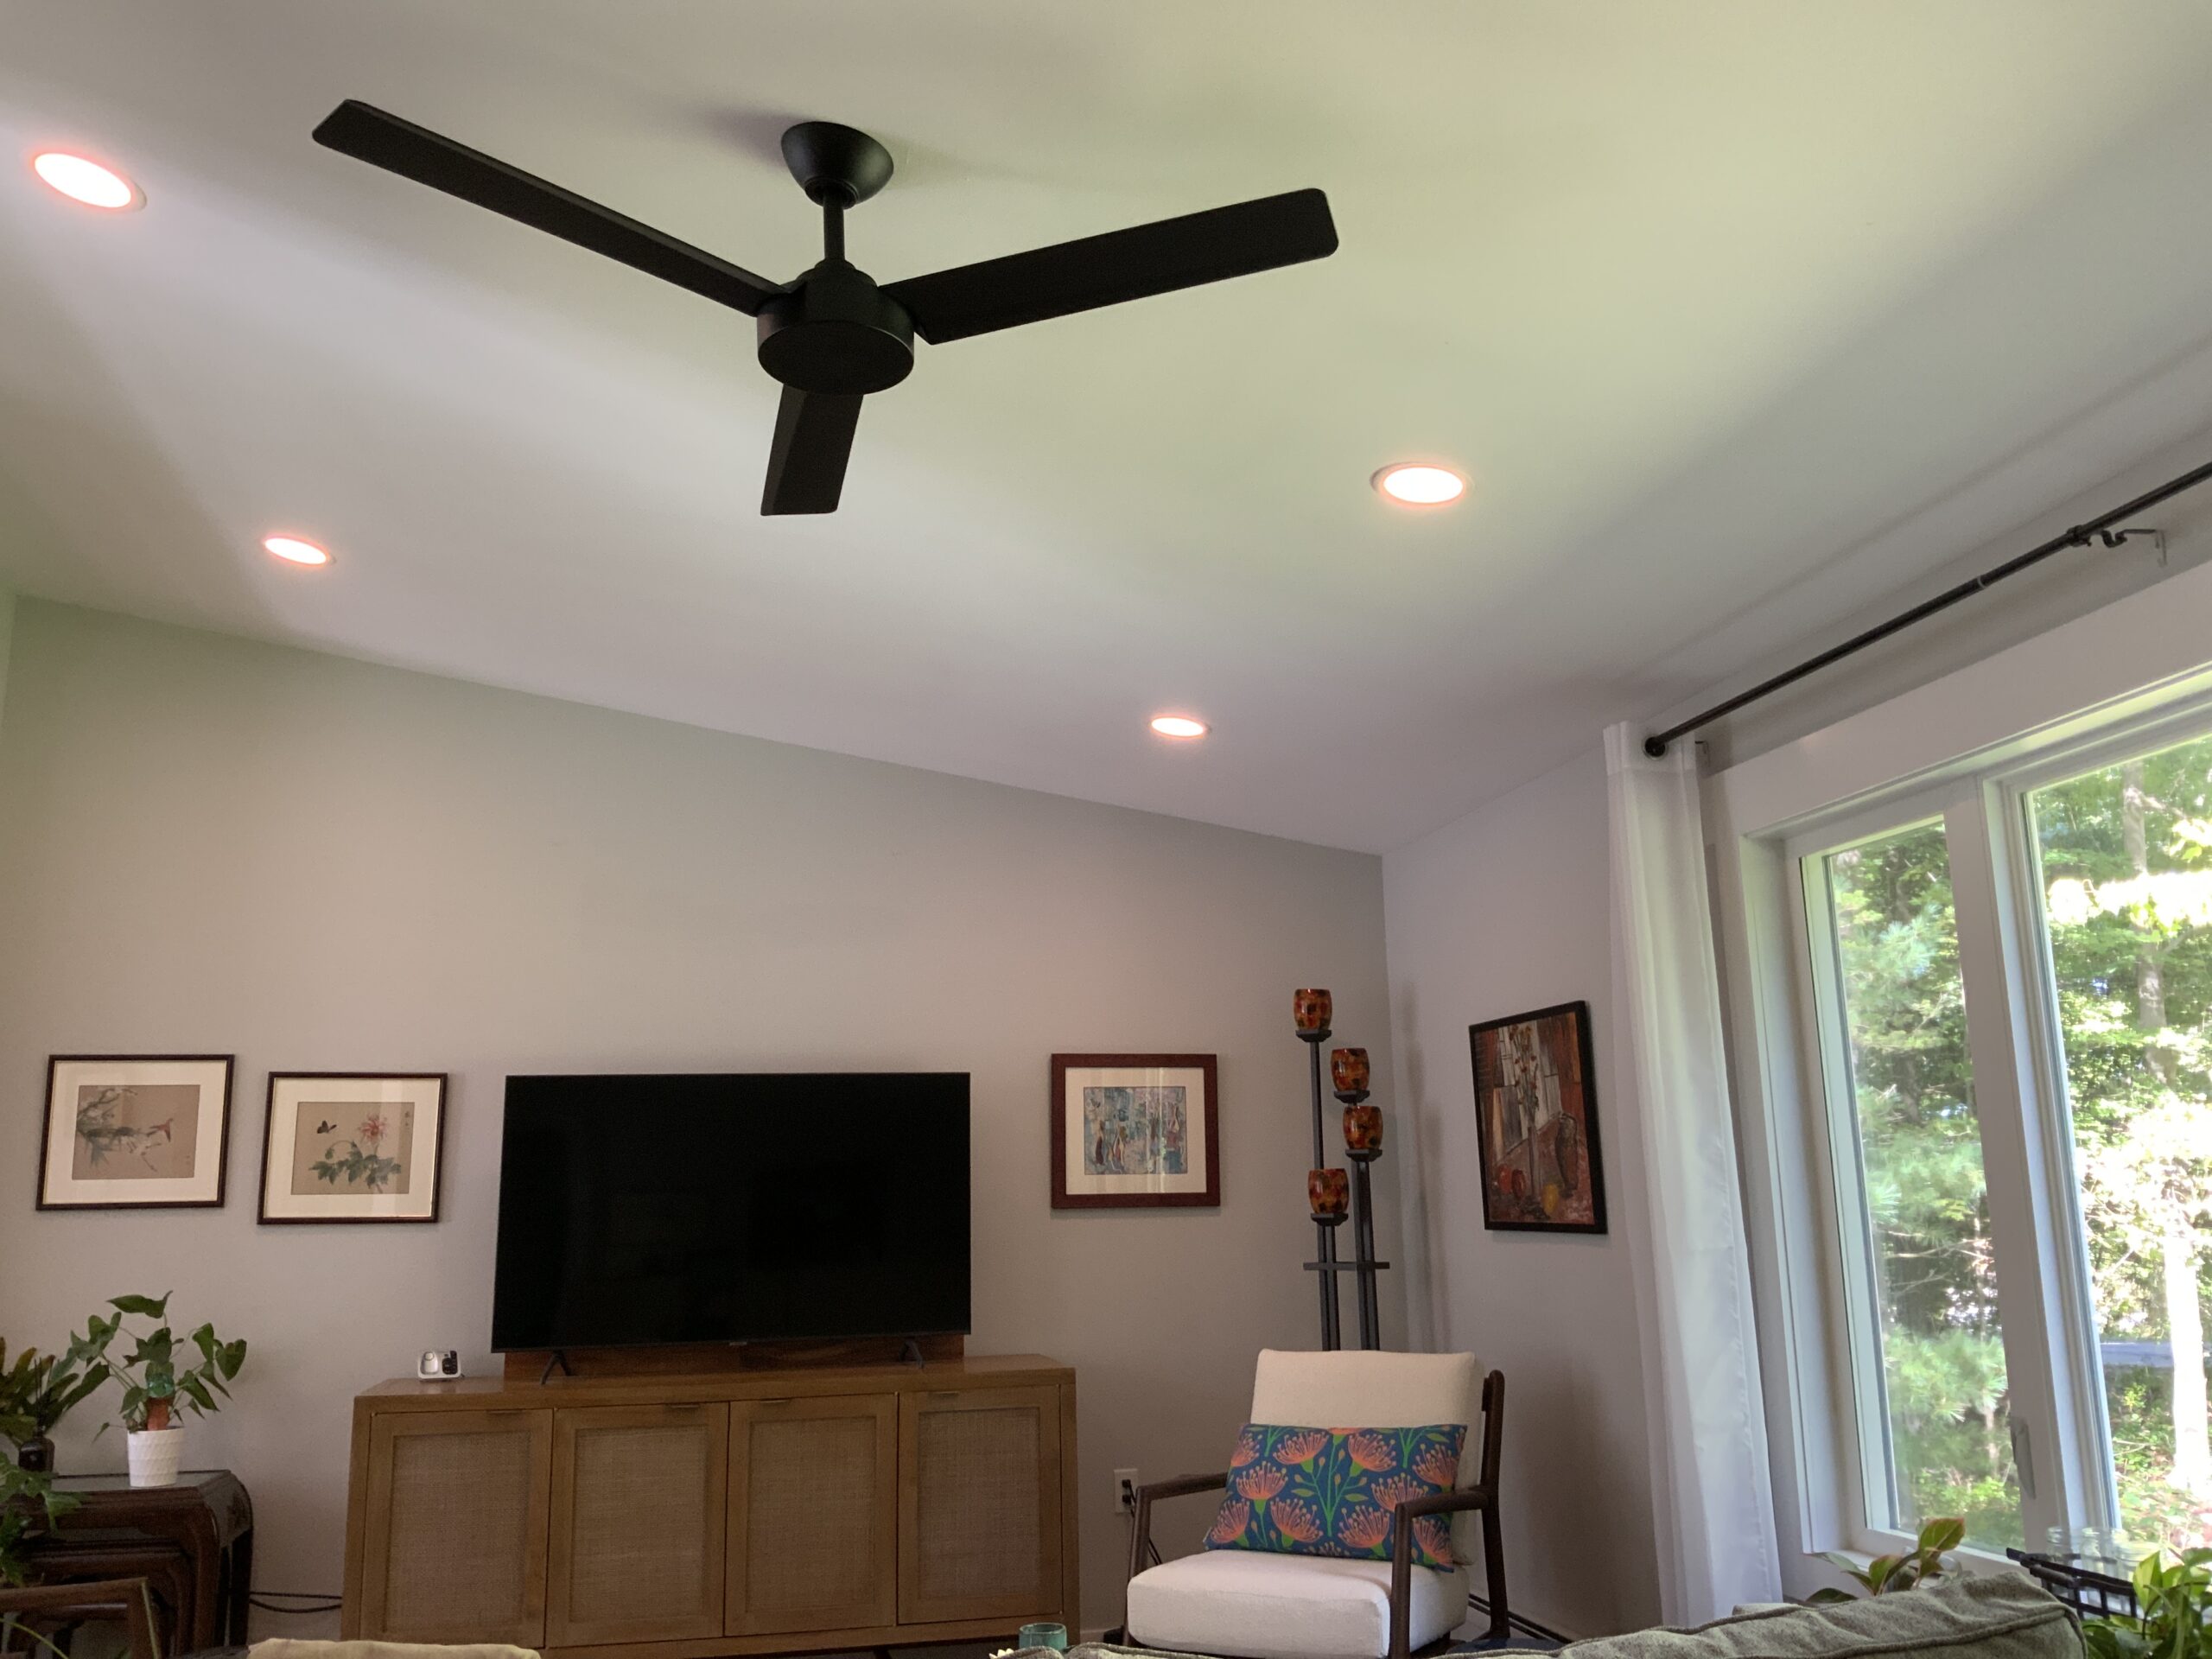 Discover the Ceiling Fan Evolution with Diamondexch9 and Skyinplay Reading Club